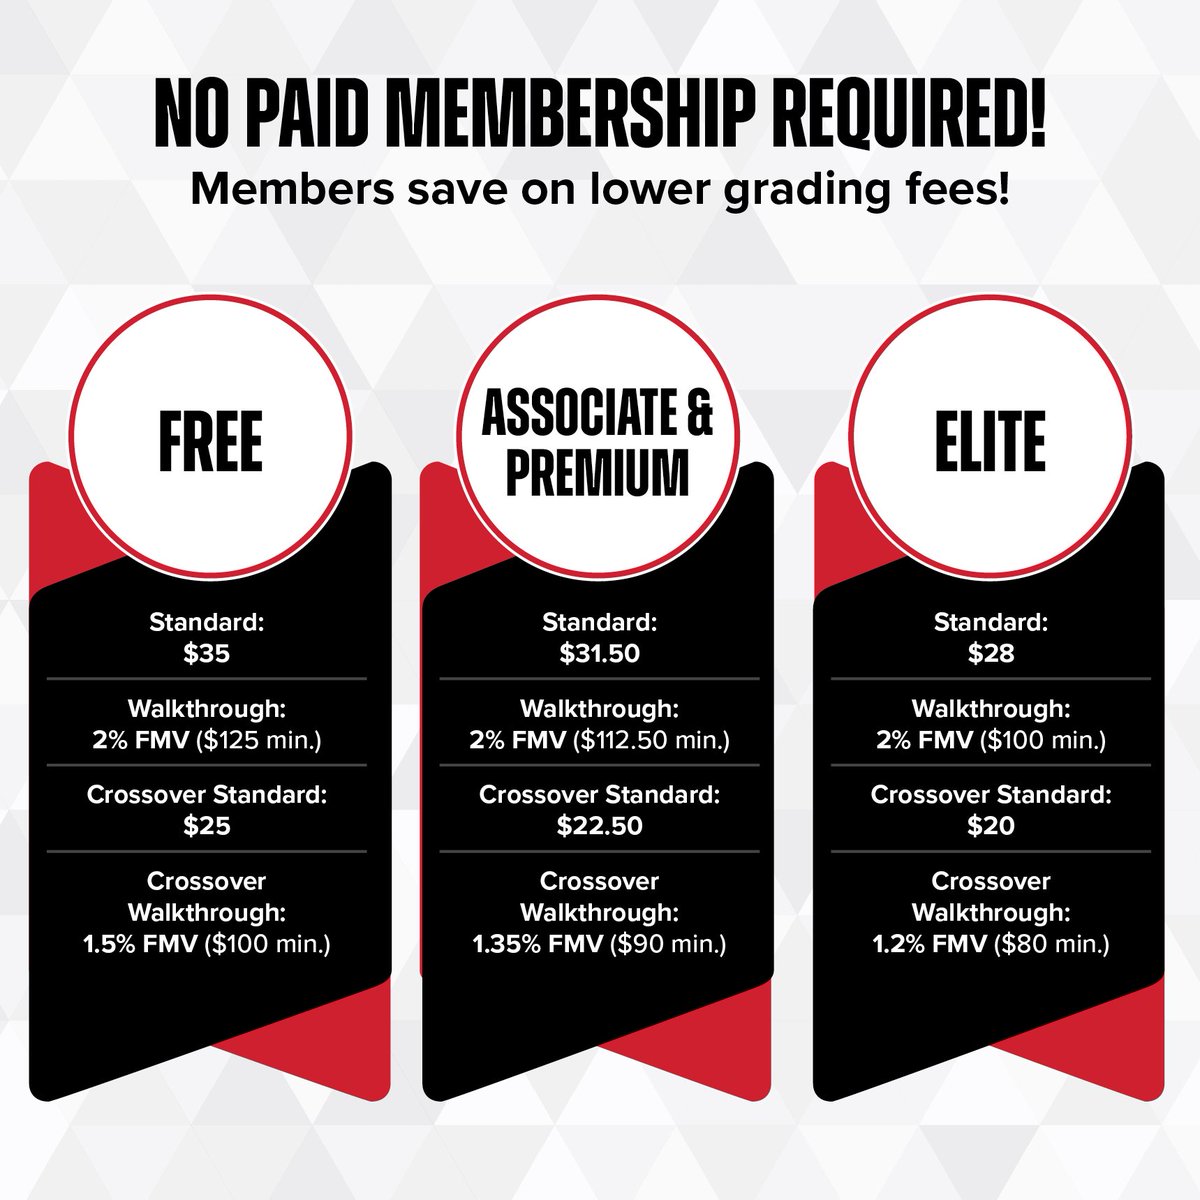 CGC is leveling up the membership game with more affordable prices! 🎉 CGC Associate, Premium, and Elite members are in for a treat! Associate and Premium members enjoy a cool 10% off grading fees, while Elite members score an awesome 20% off, plus exclusive benefits!